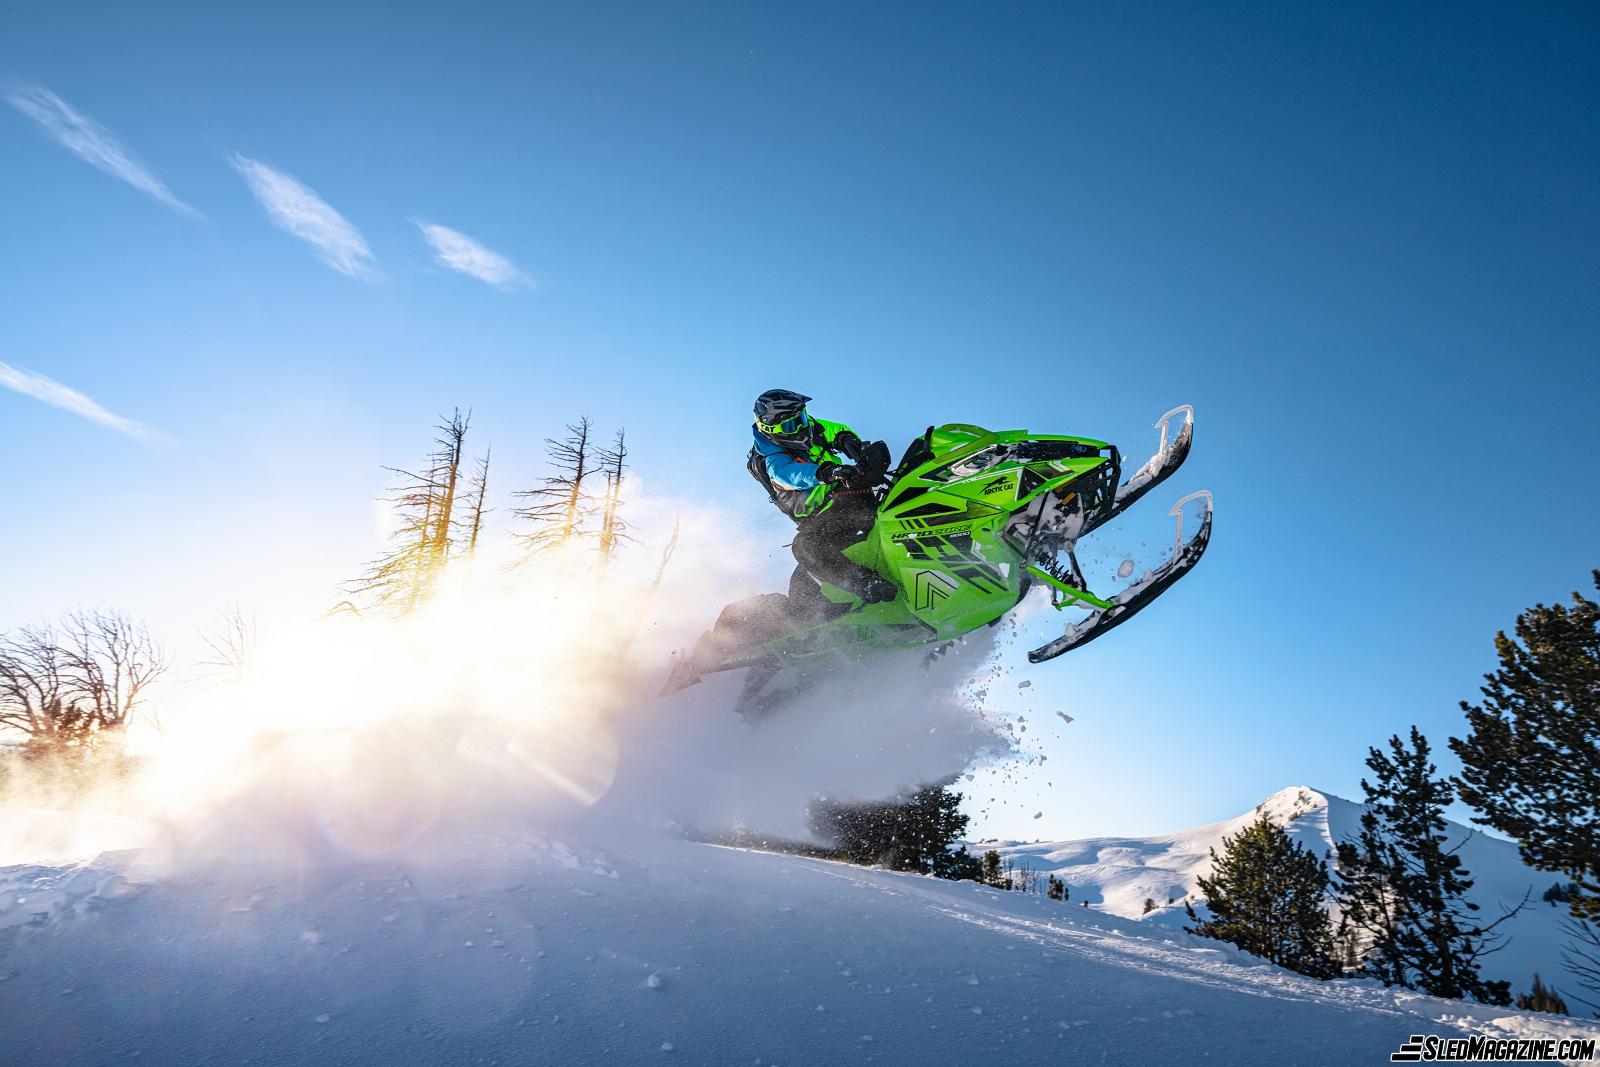 Overview of the highlights of the 2022 Arctic Cat snowmobile lineup